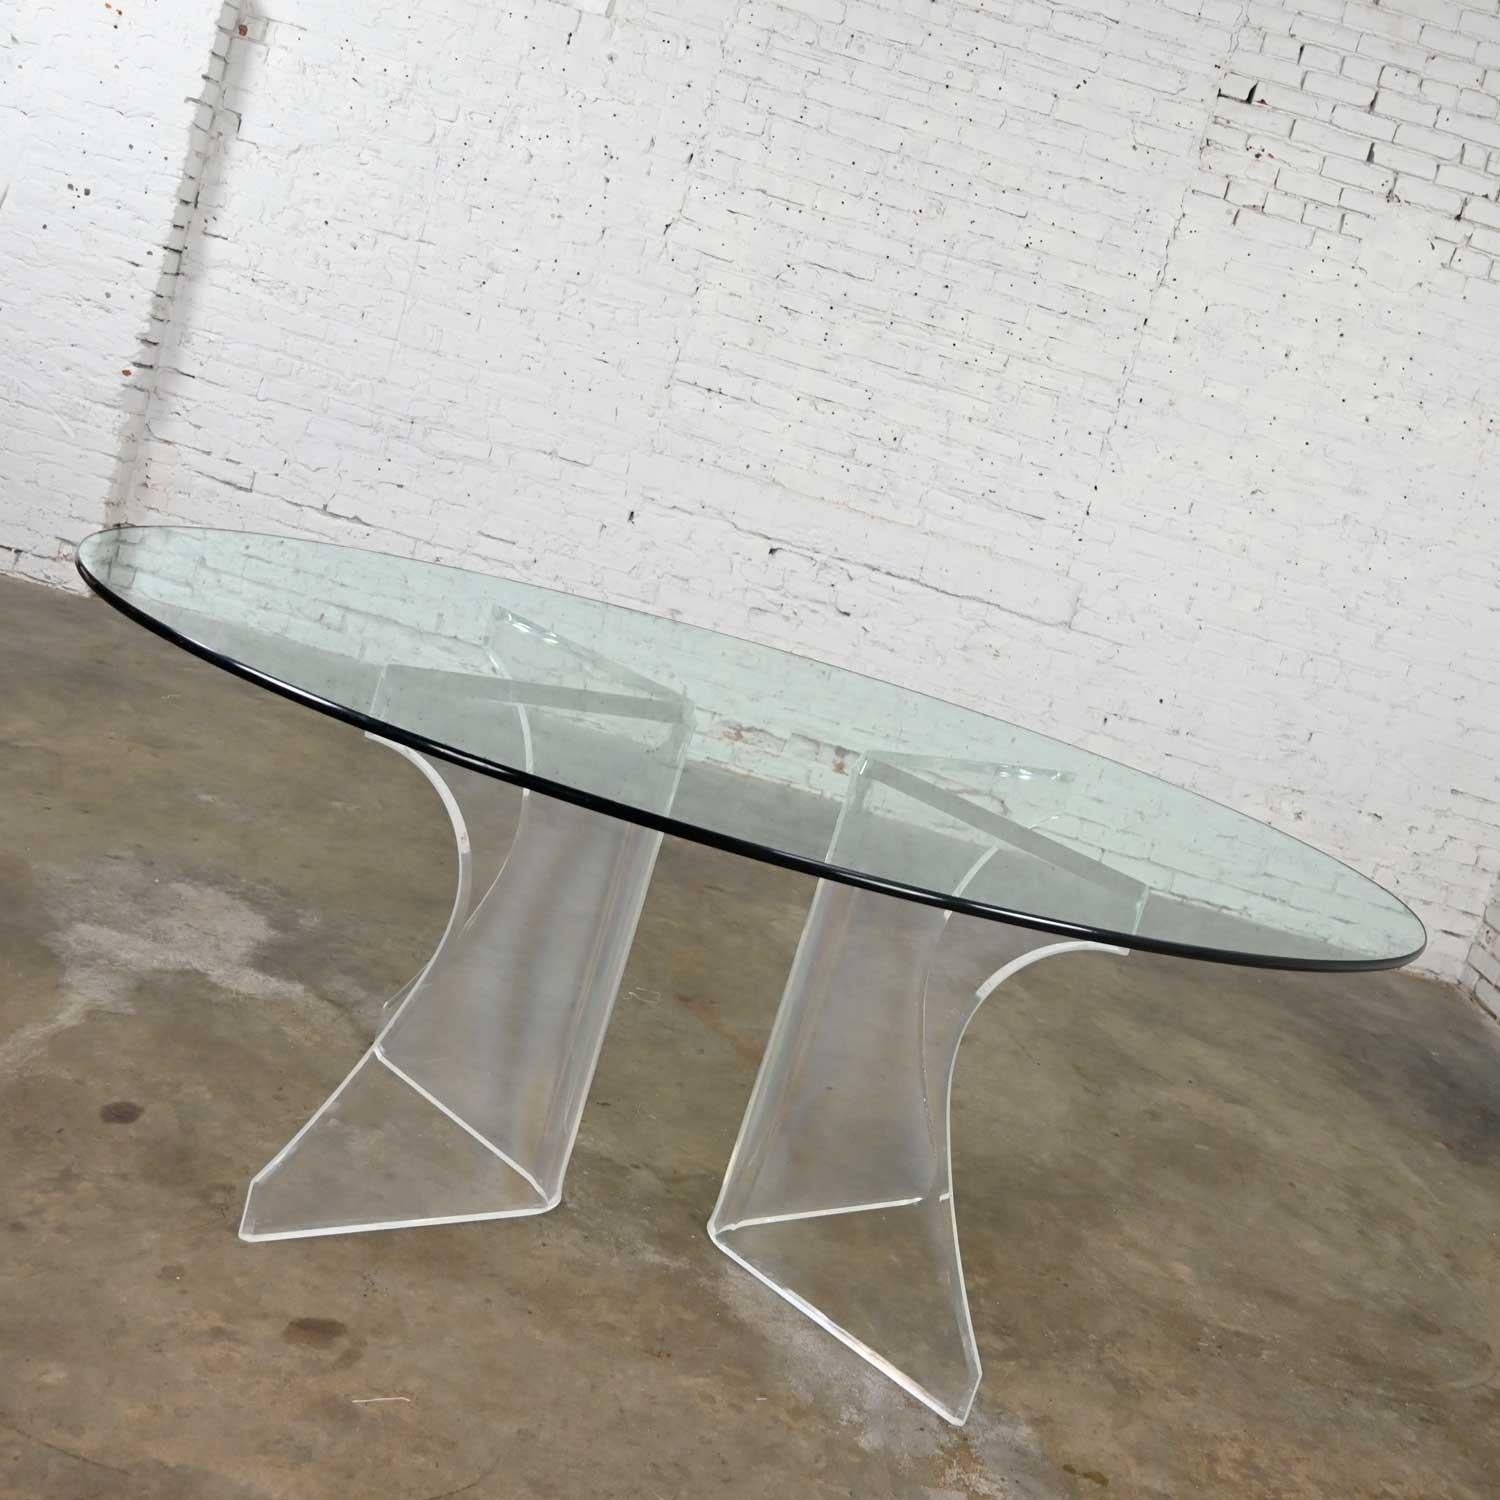 Gorgeous vintage modern Lucite sculptural dining table with oval shaped glass top. Beautiful condition, keeping in mind that this is vintage and not new so will have signs of use and wear. The Lucite has been professionally polished and is wonderful